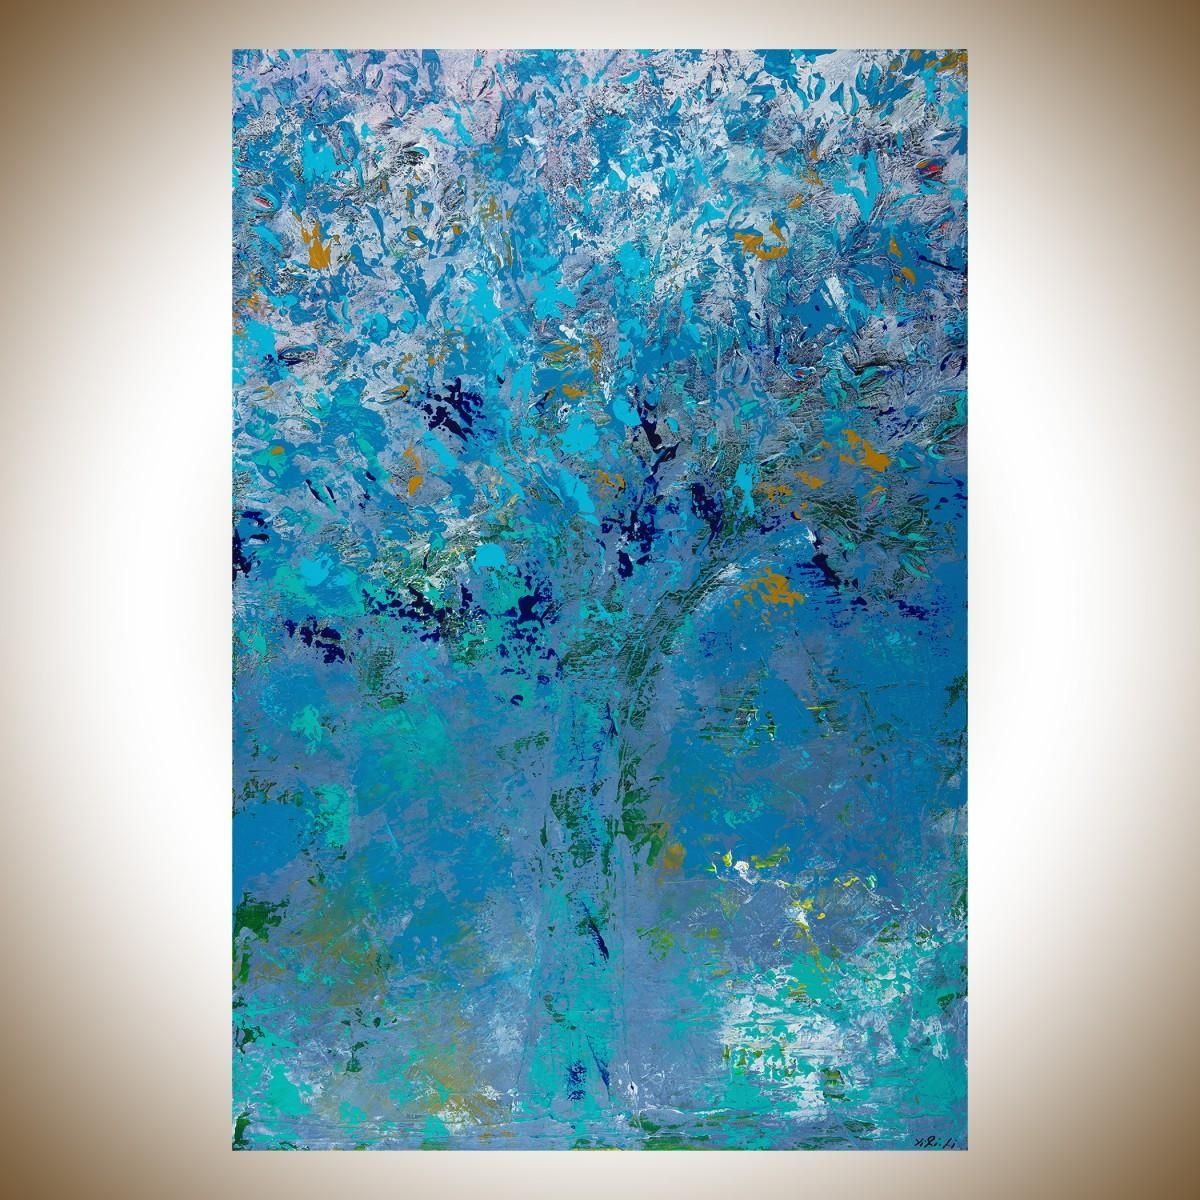 First Snowfallqiqigallery 36"x24" Original Modern Contemporary Throughout Black And Teal Wall Art (View 5 of 20)